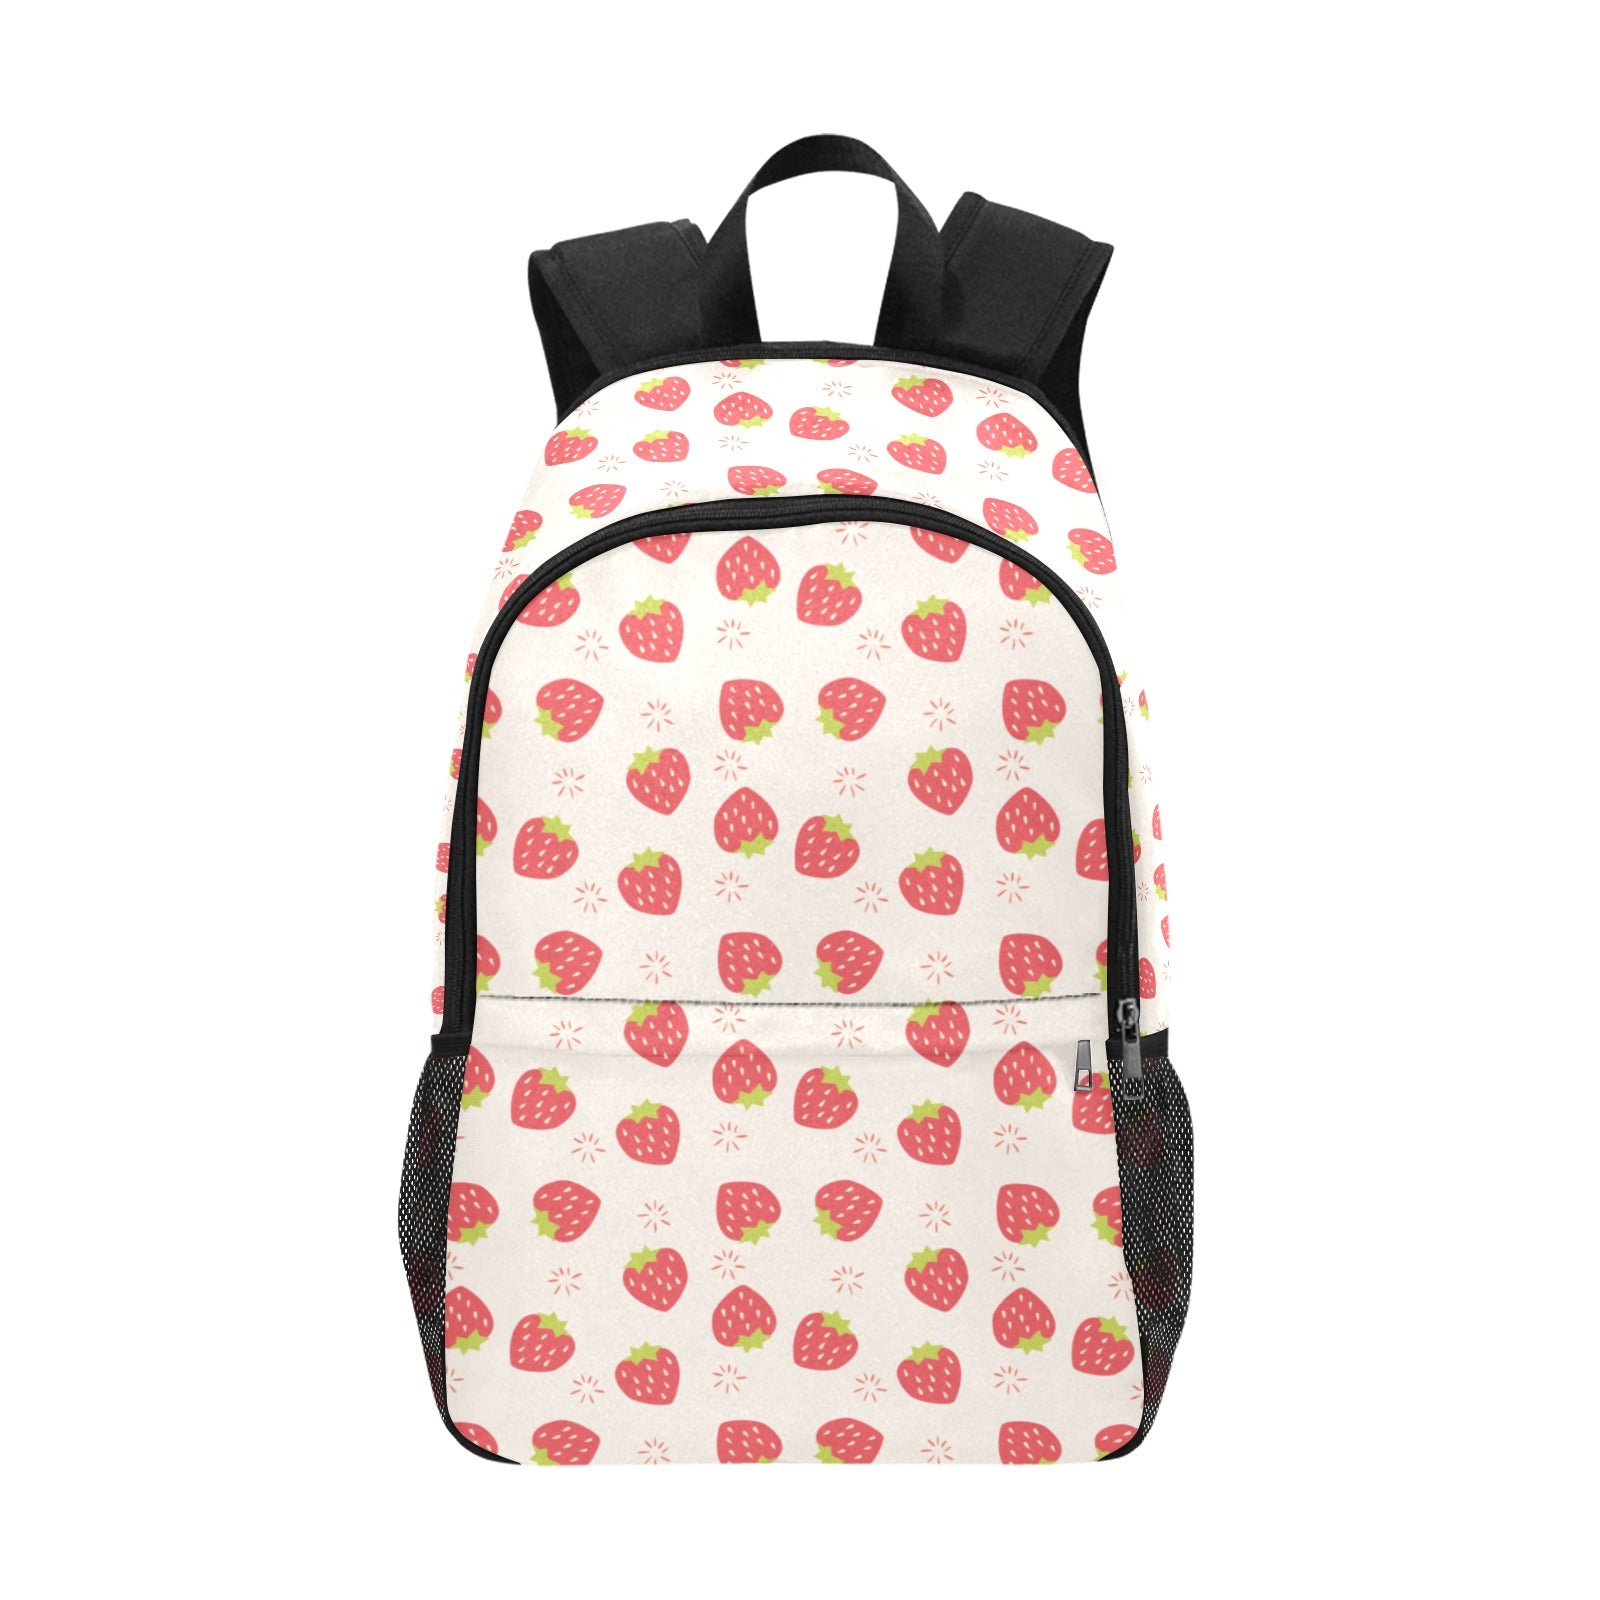 Strawberry Backpack, Pink Red Print Men Women Kids Gift Him Her School College Waterproof Side Mesh Pockets Aesthetic Bag Starcove Fashion